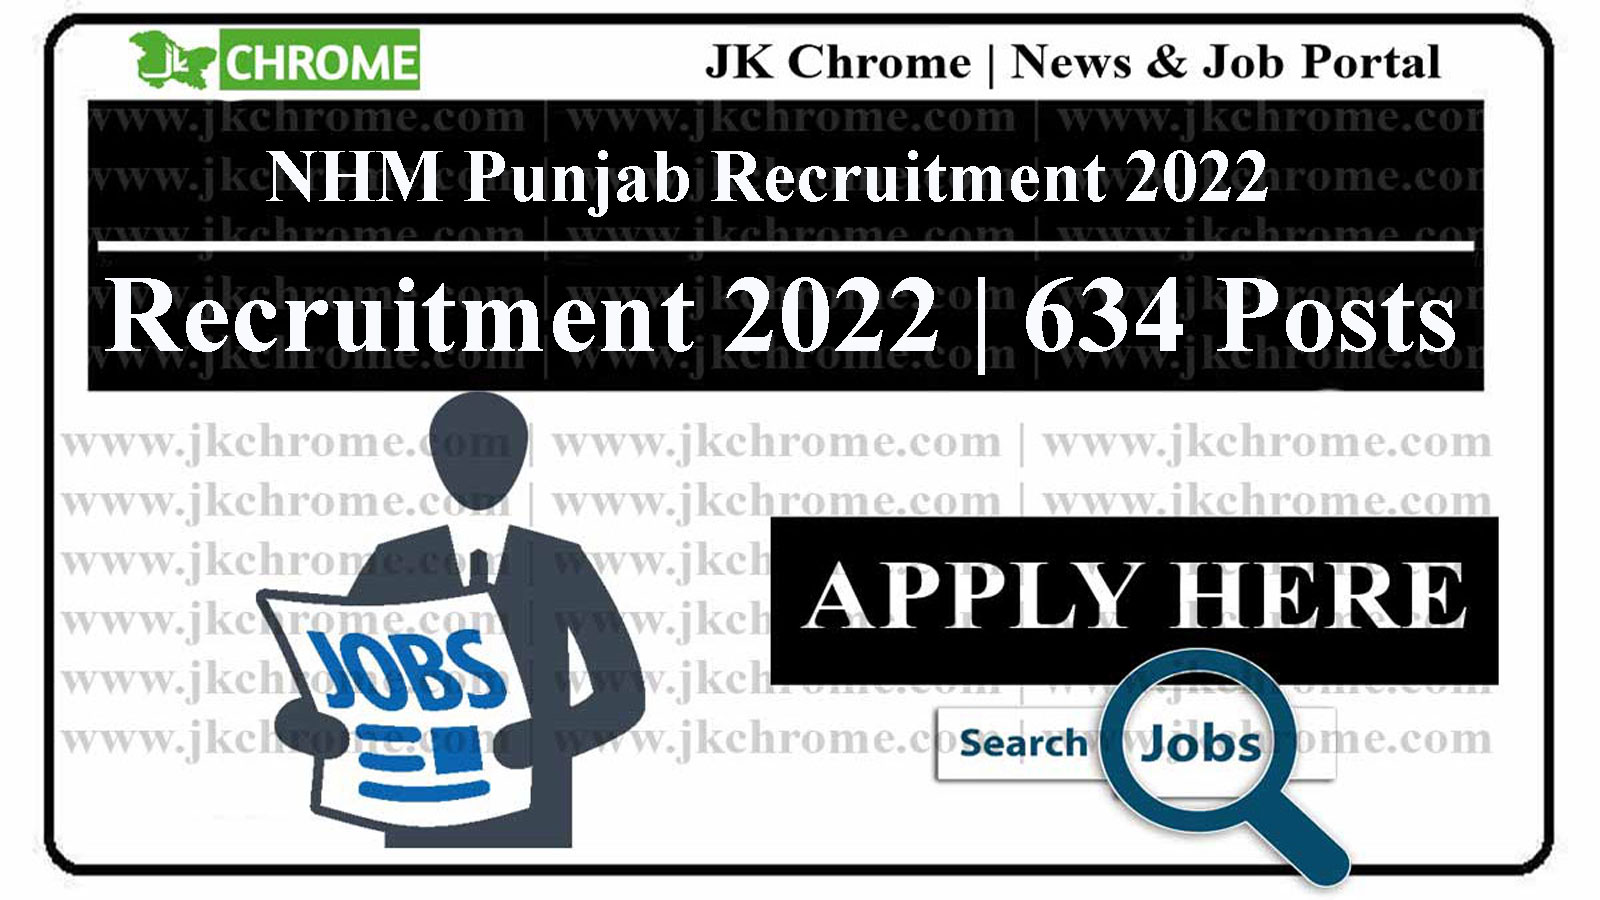 NHM Punjab Recruitment 2022 for 634 posts, interview on Nov 9 and 10